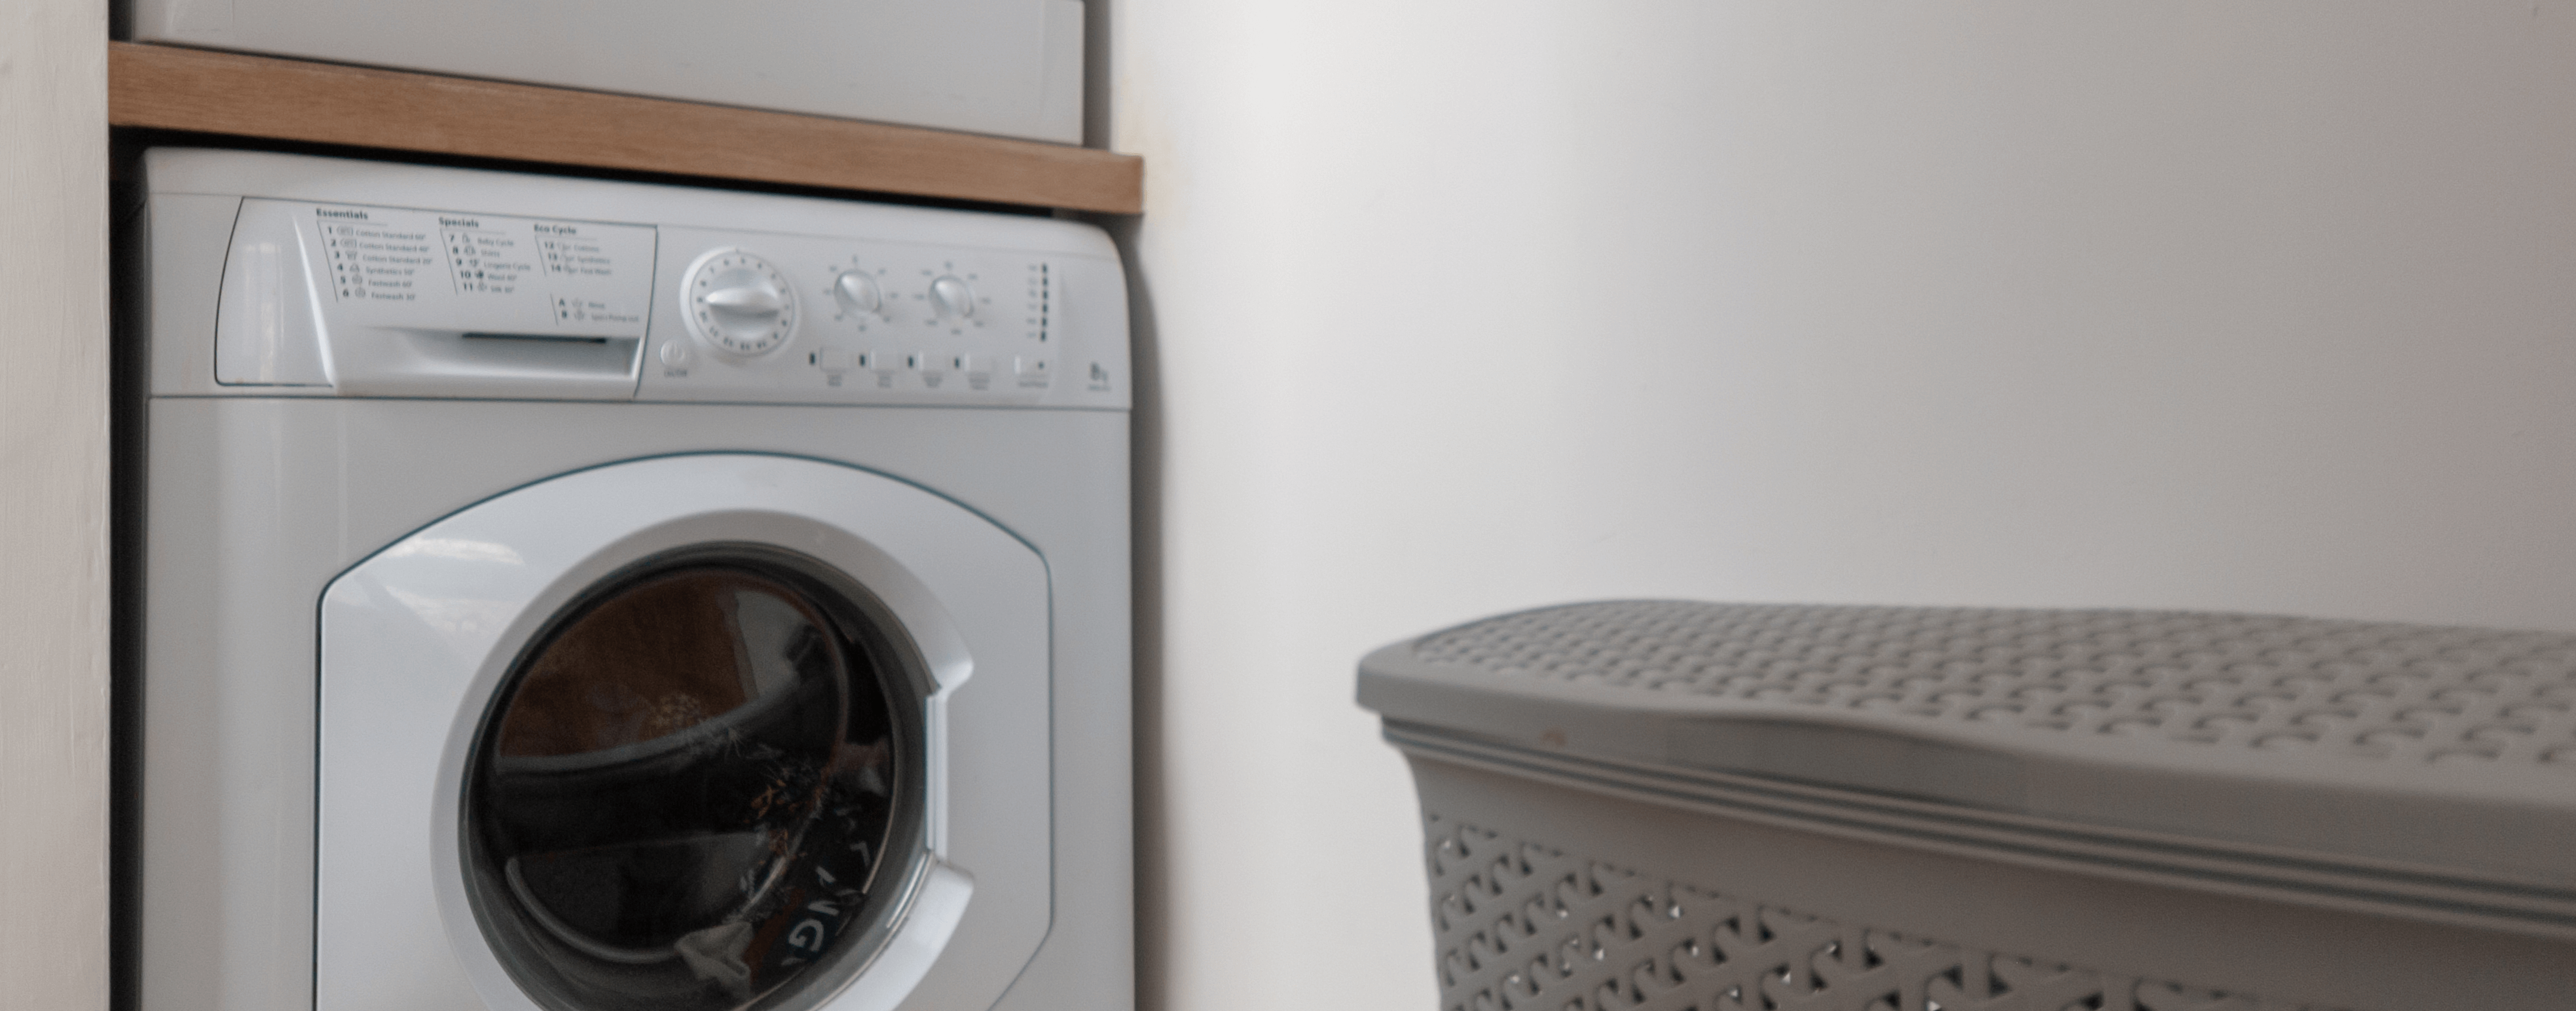 What do wind, walking, and washing machines have in common?